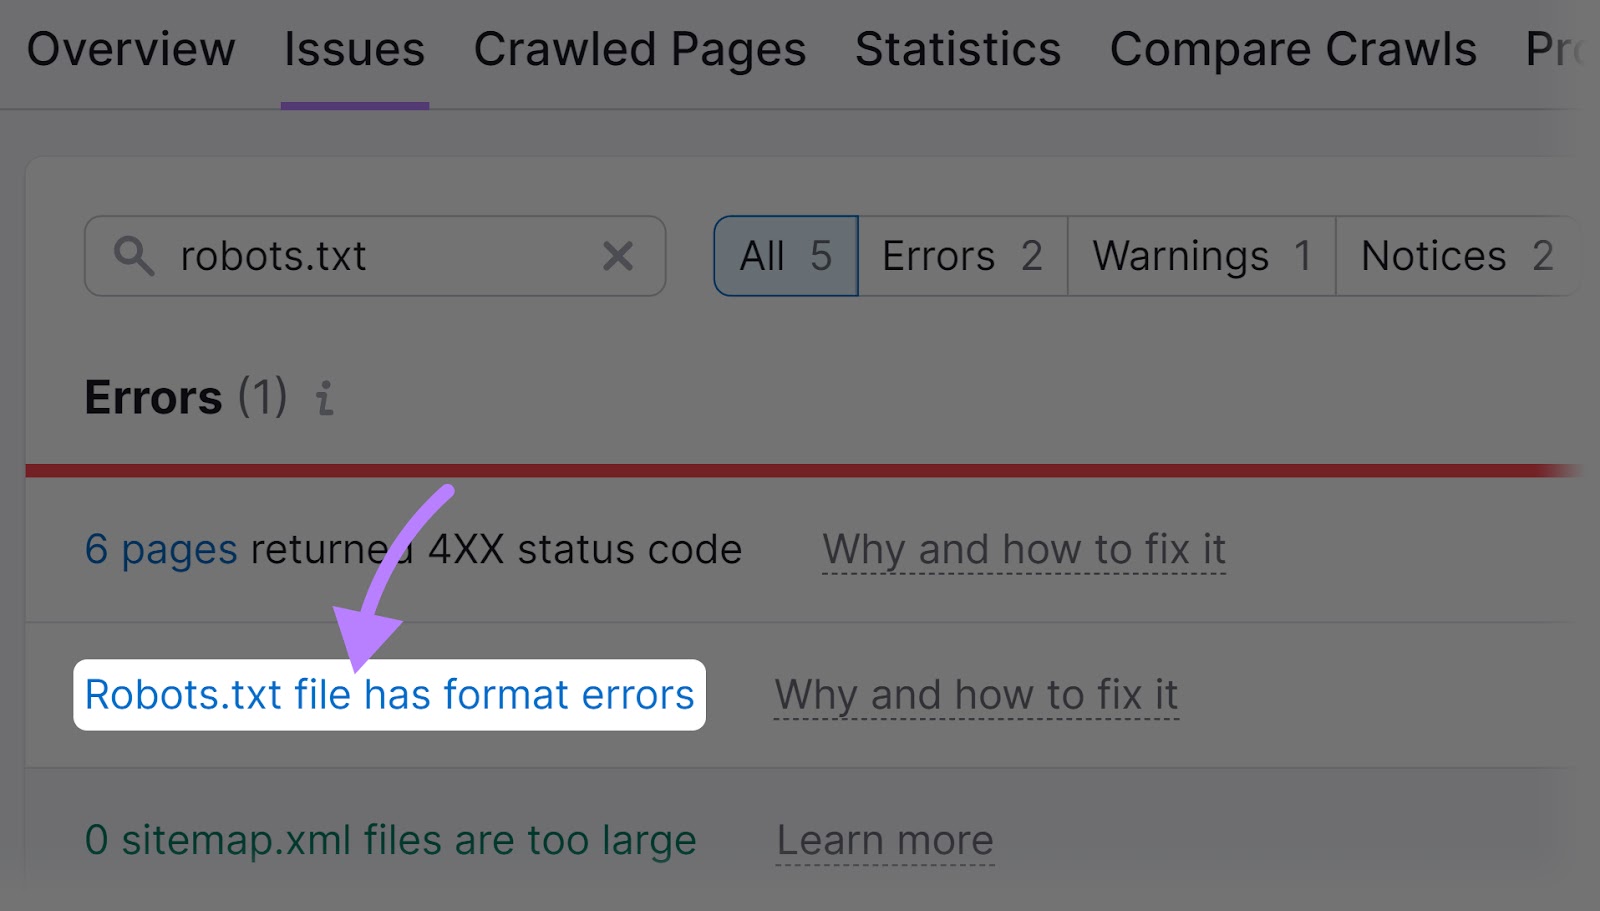 "Robots.txt file has format errors" text highlighted